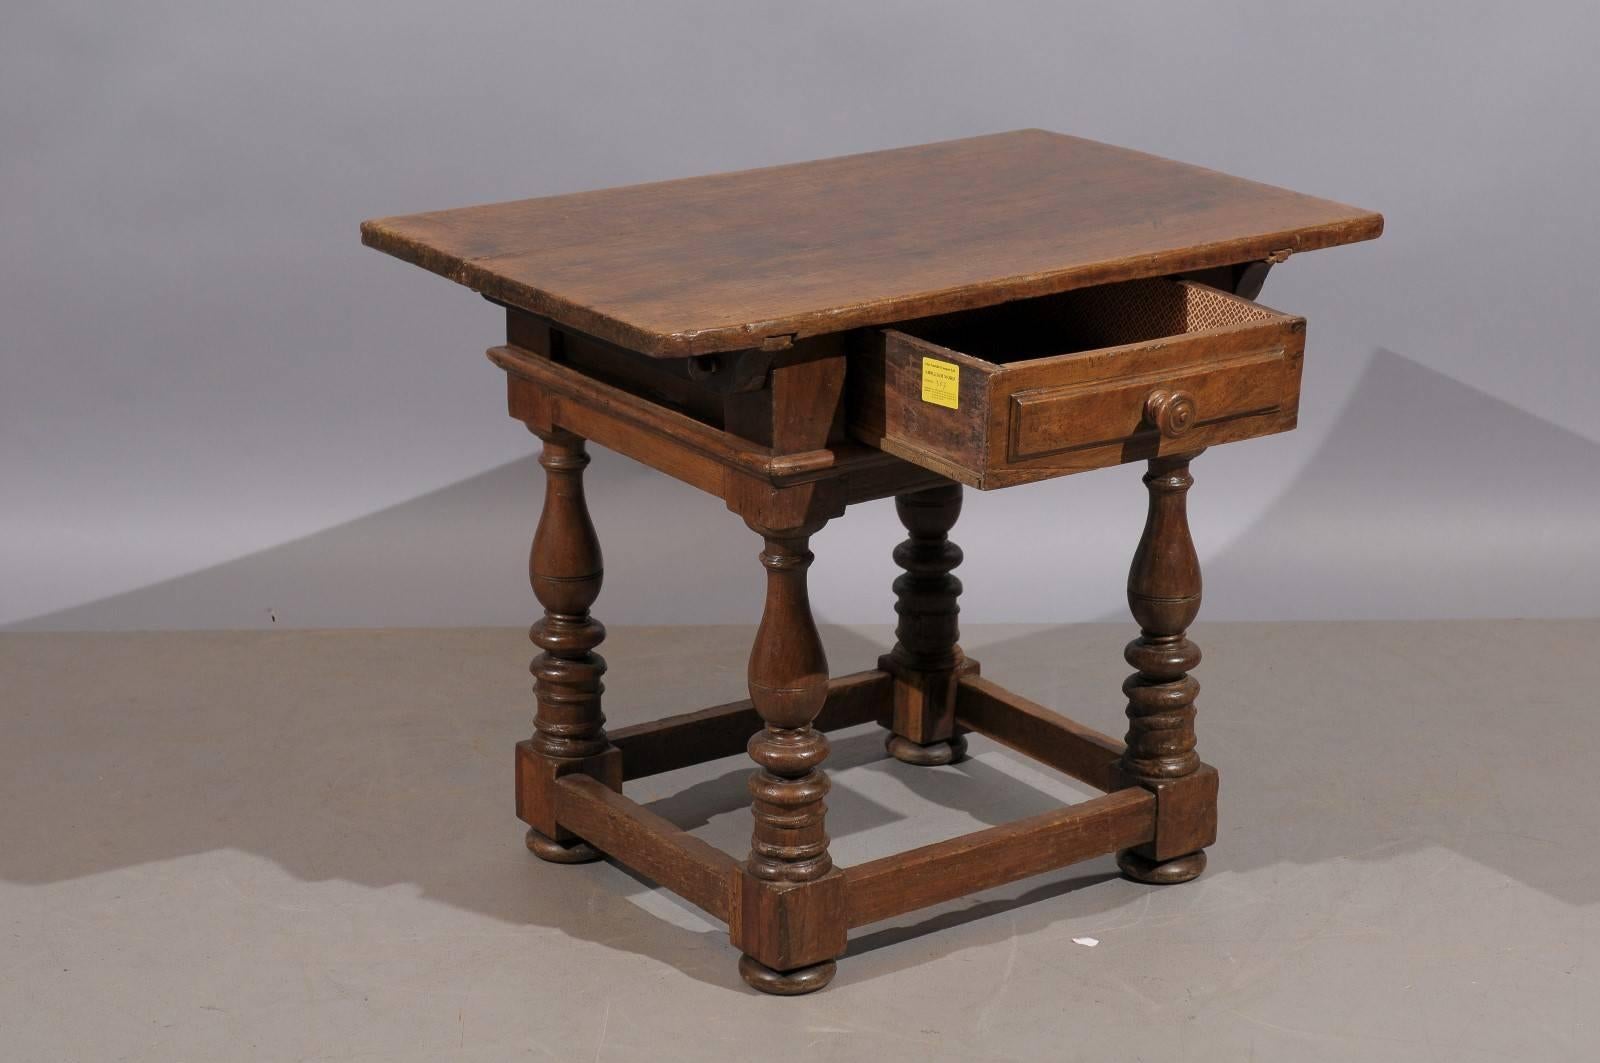 European 18th Century Louis XIII Style Low Side Table with Drawer and Turned Legs